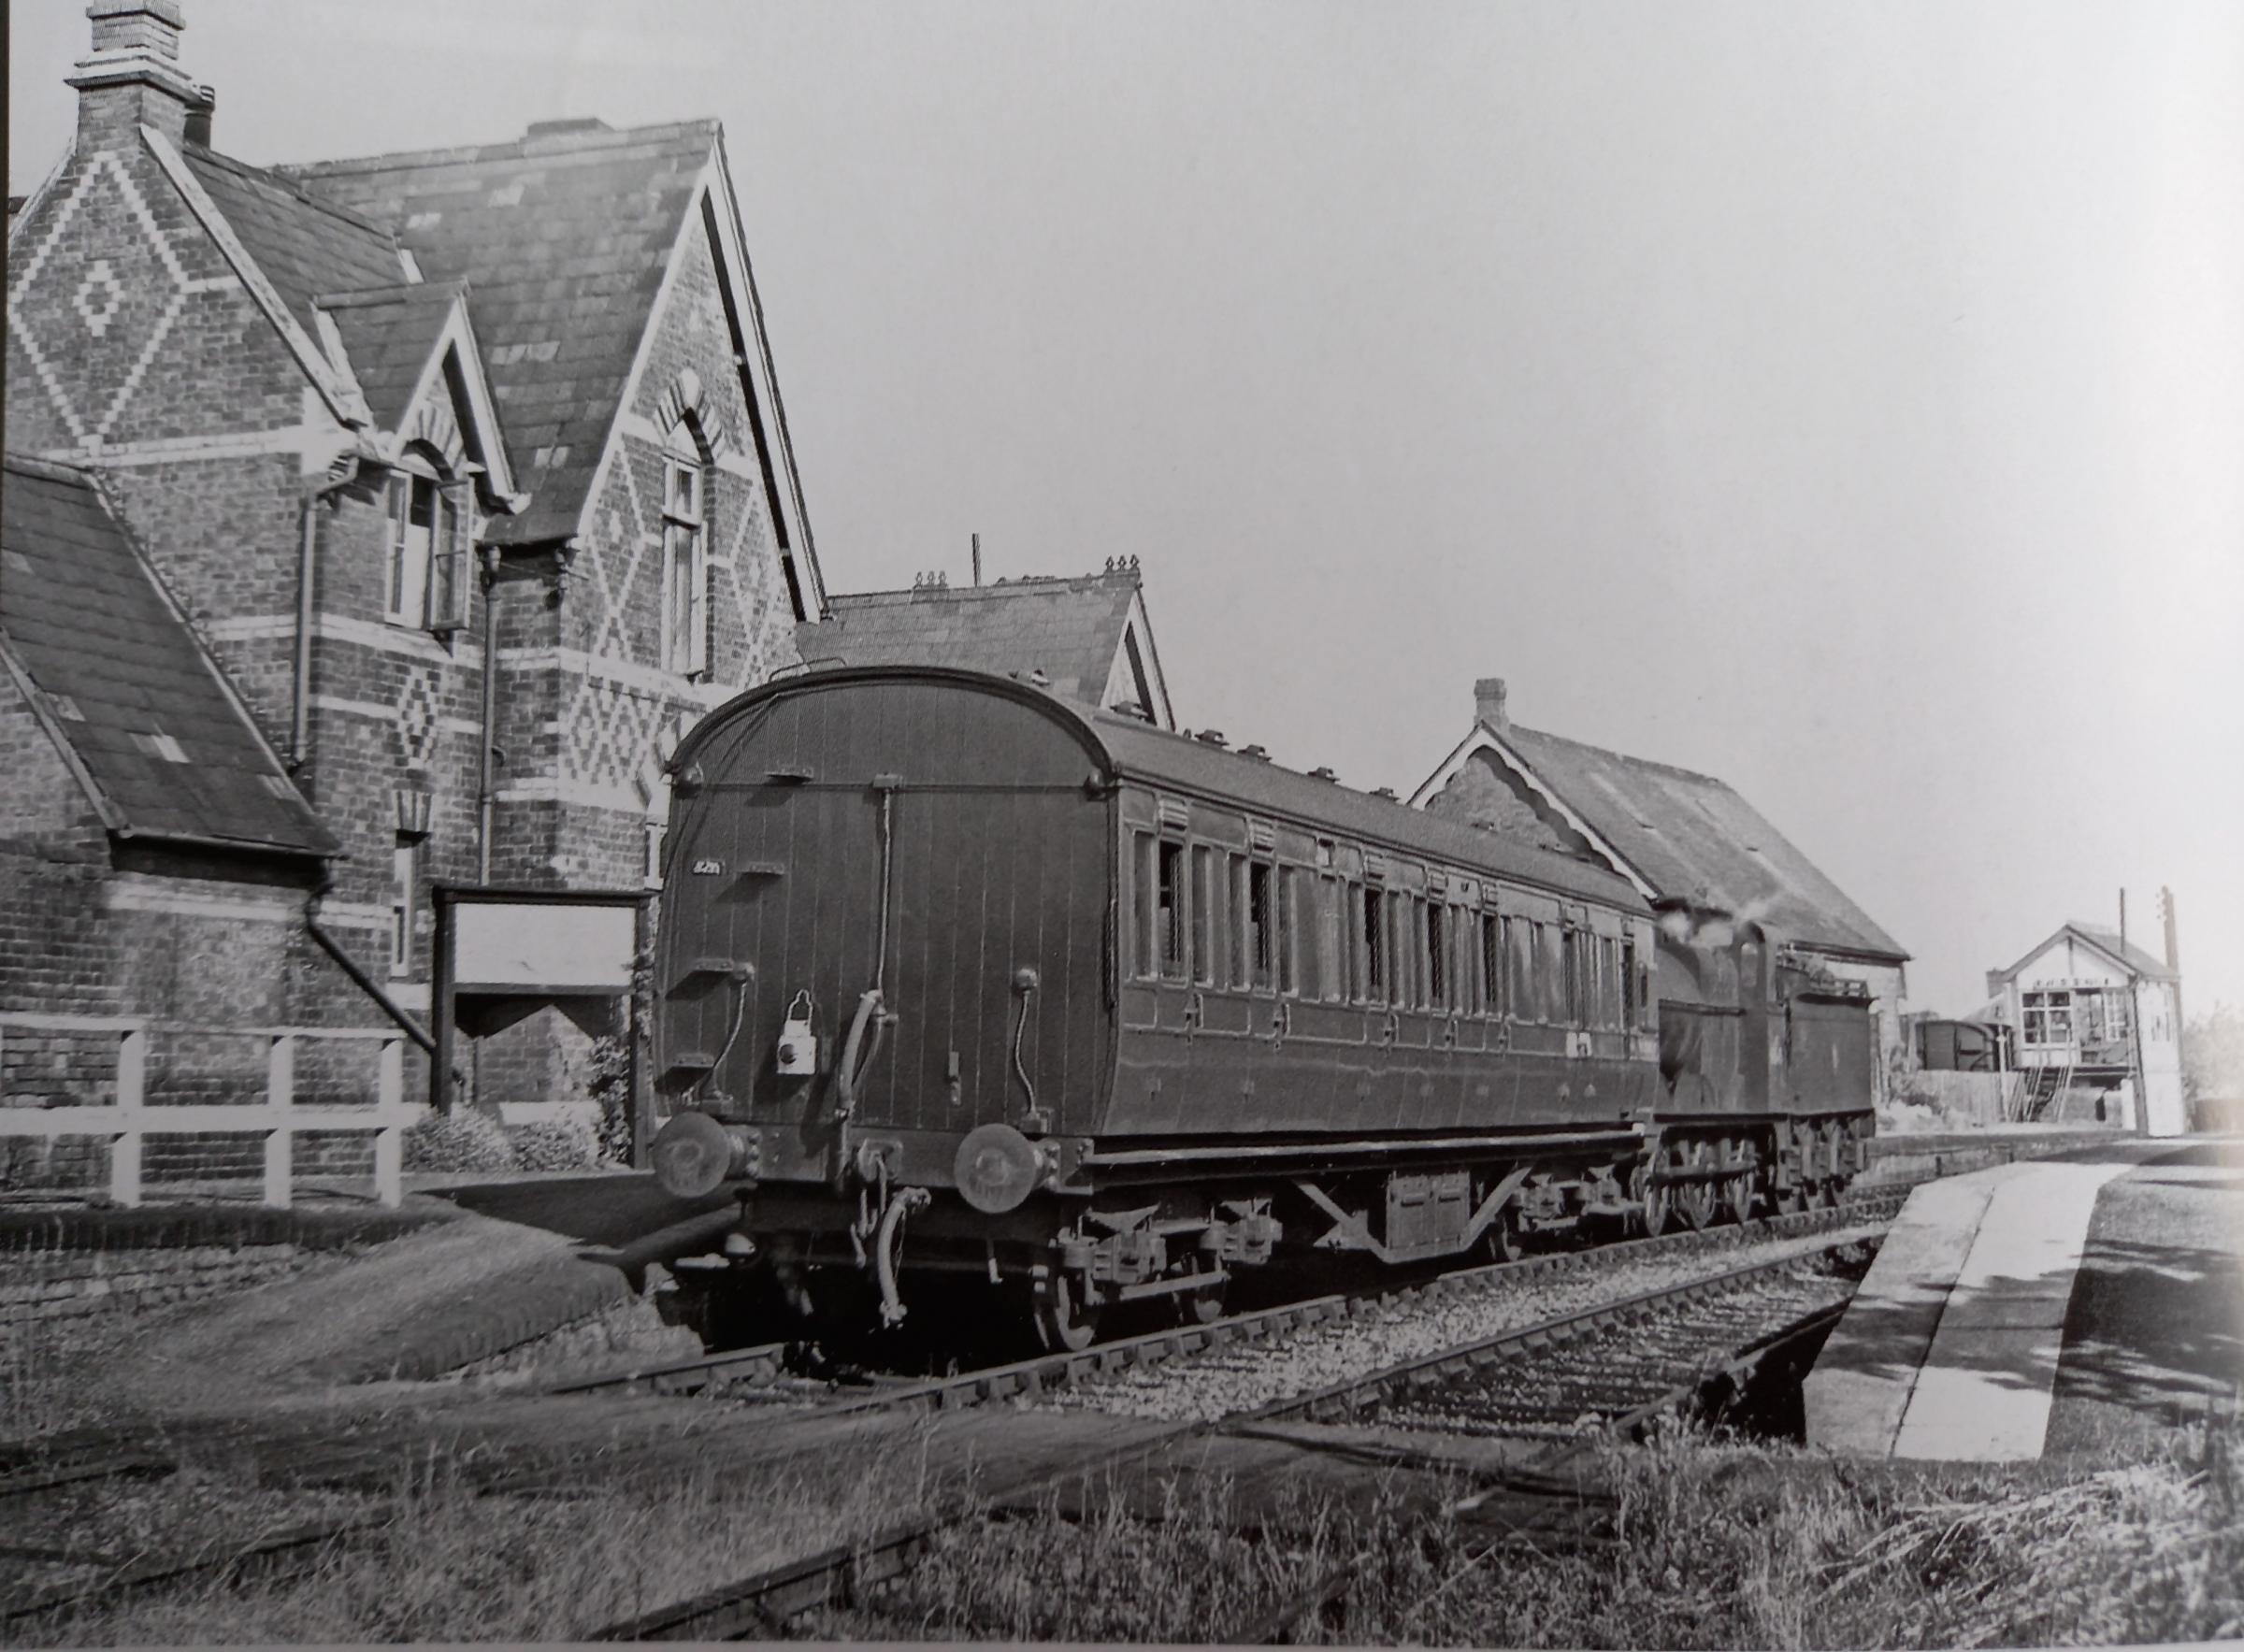 The rural peace of Upton upon Severn station in July 1955